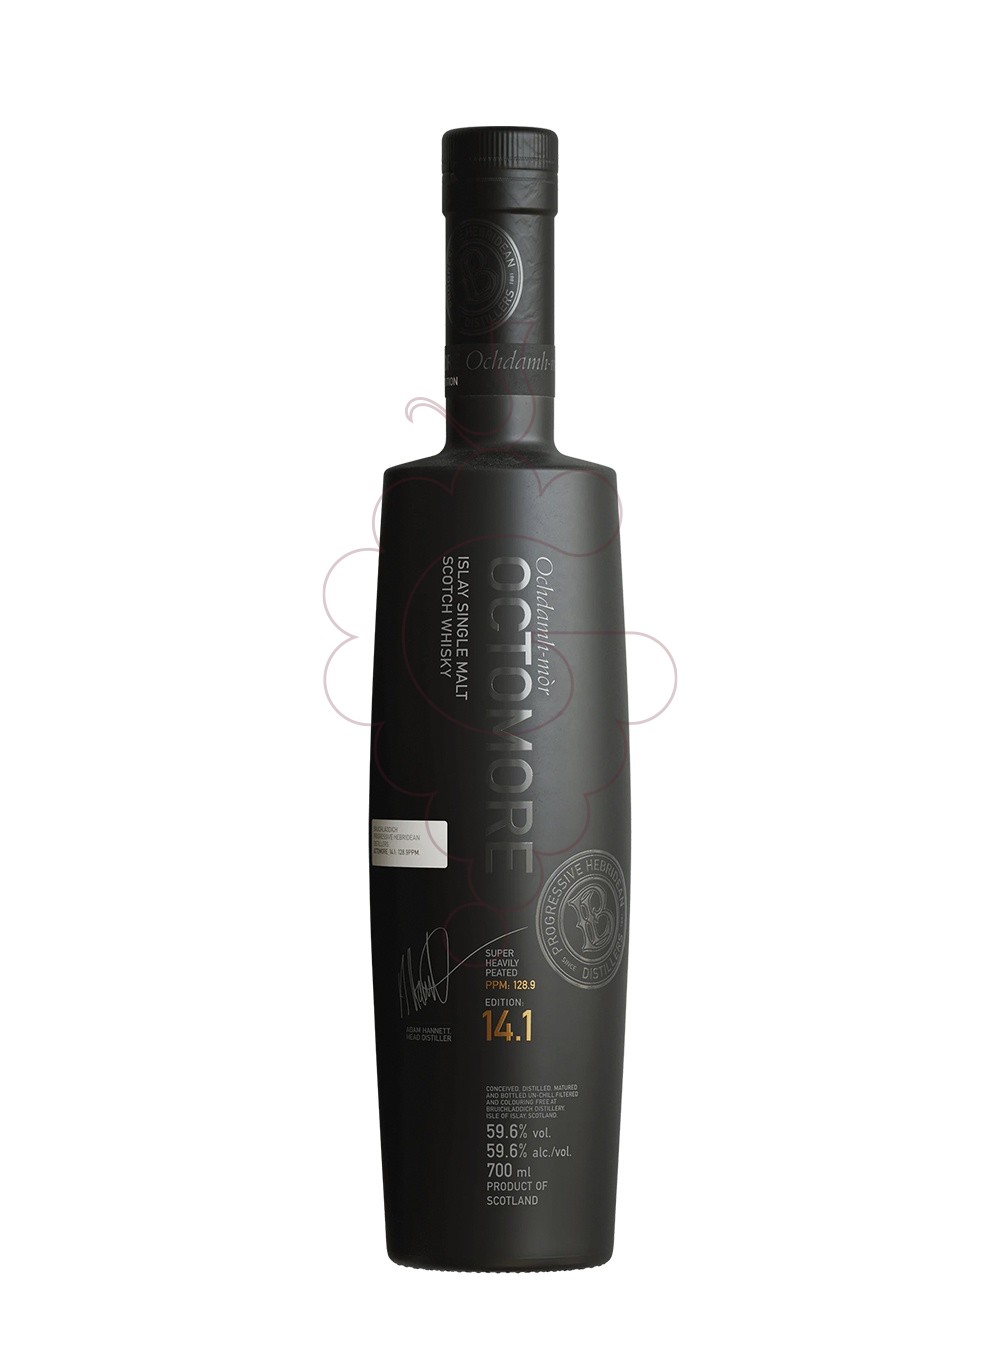 Foto Whisky Octomore 14.1 70 cl